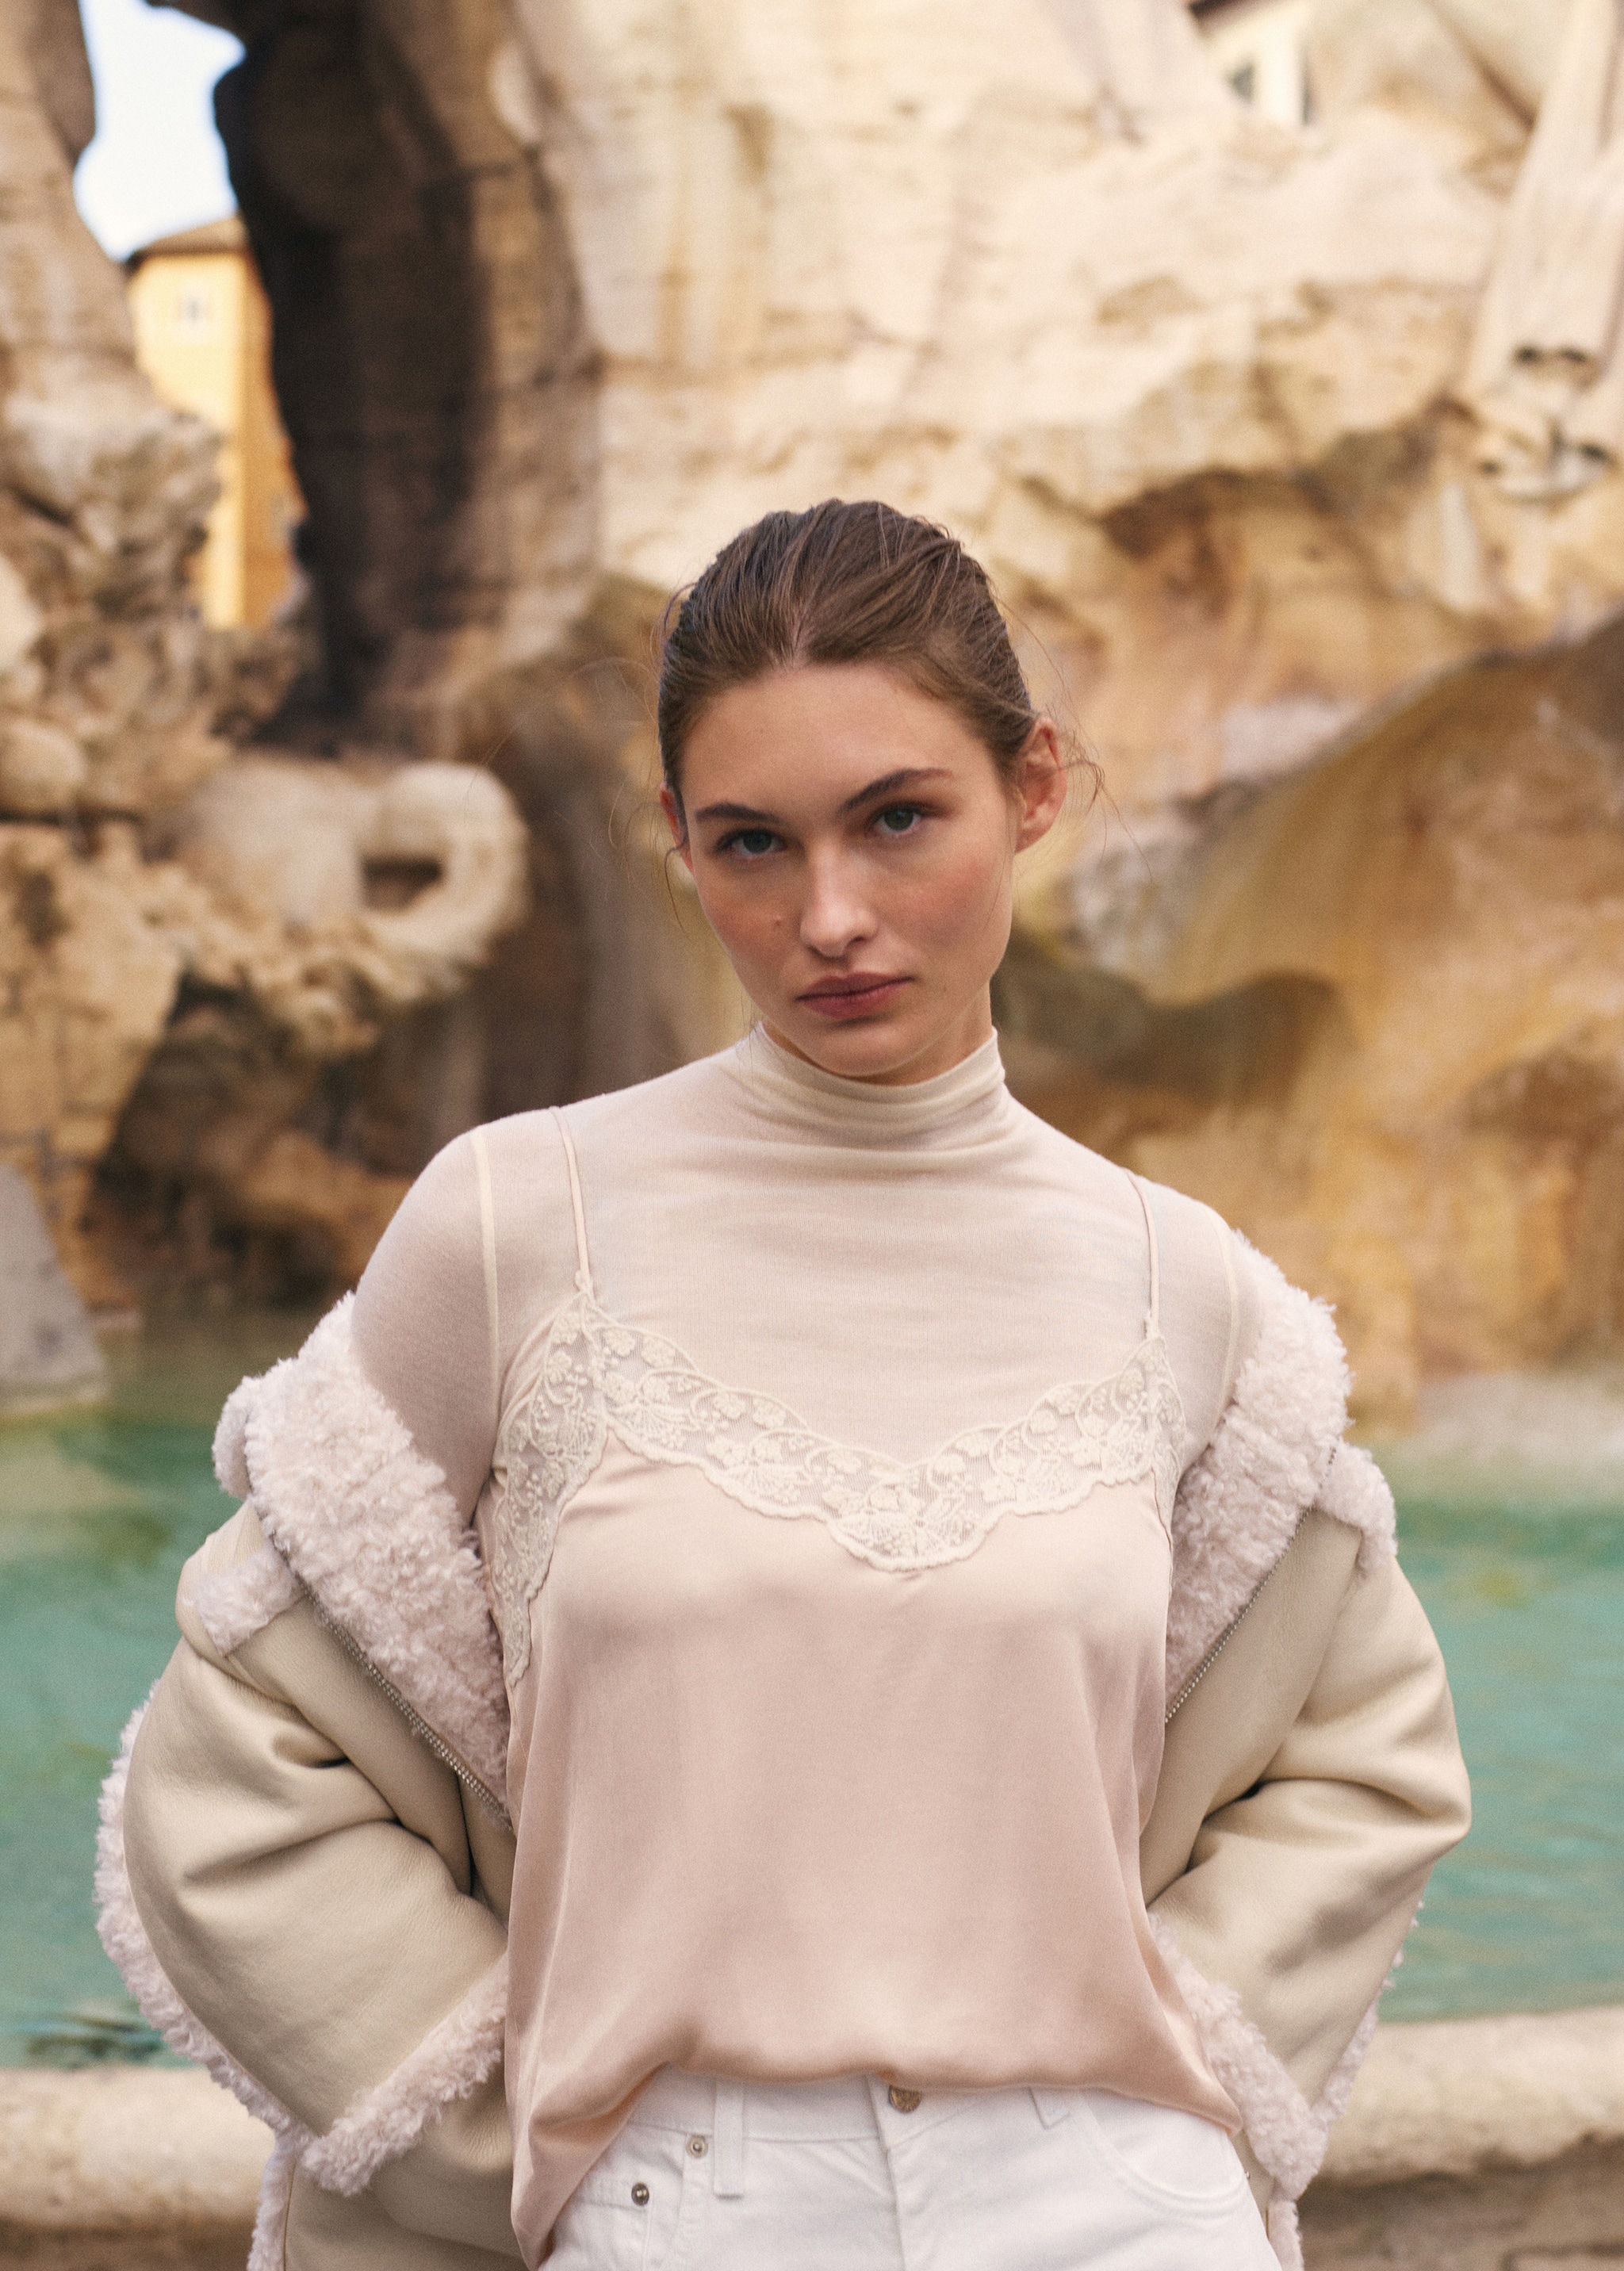 Lace top - Details of the article 5